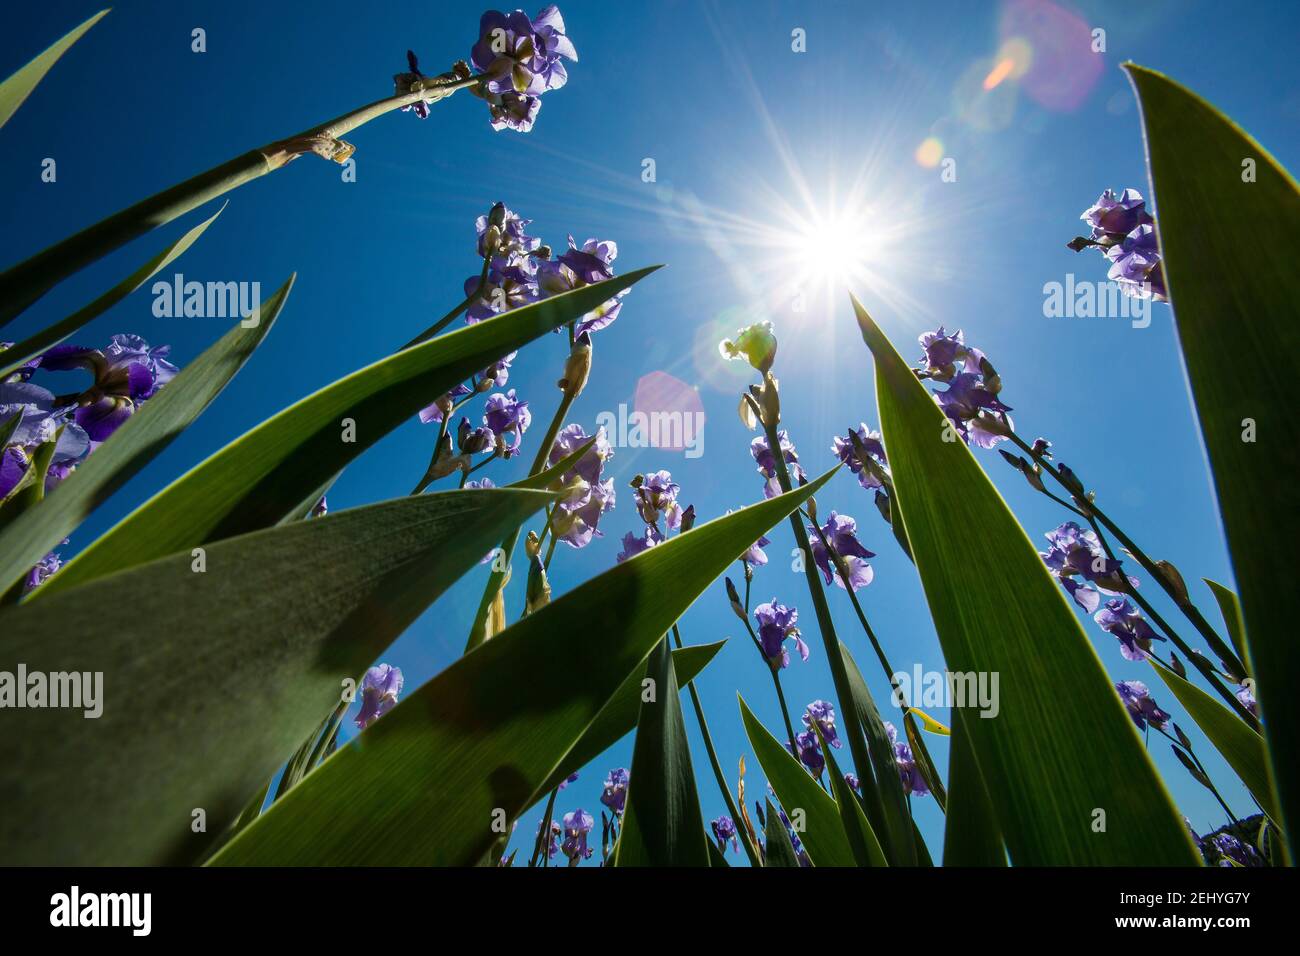 Frogs Perspective of Violet Iris Flowers with Green Leaves Pointing to the Blue Sky and Sun Stock Photo